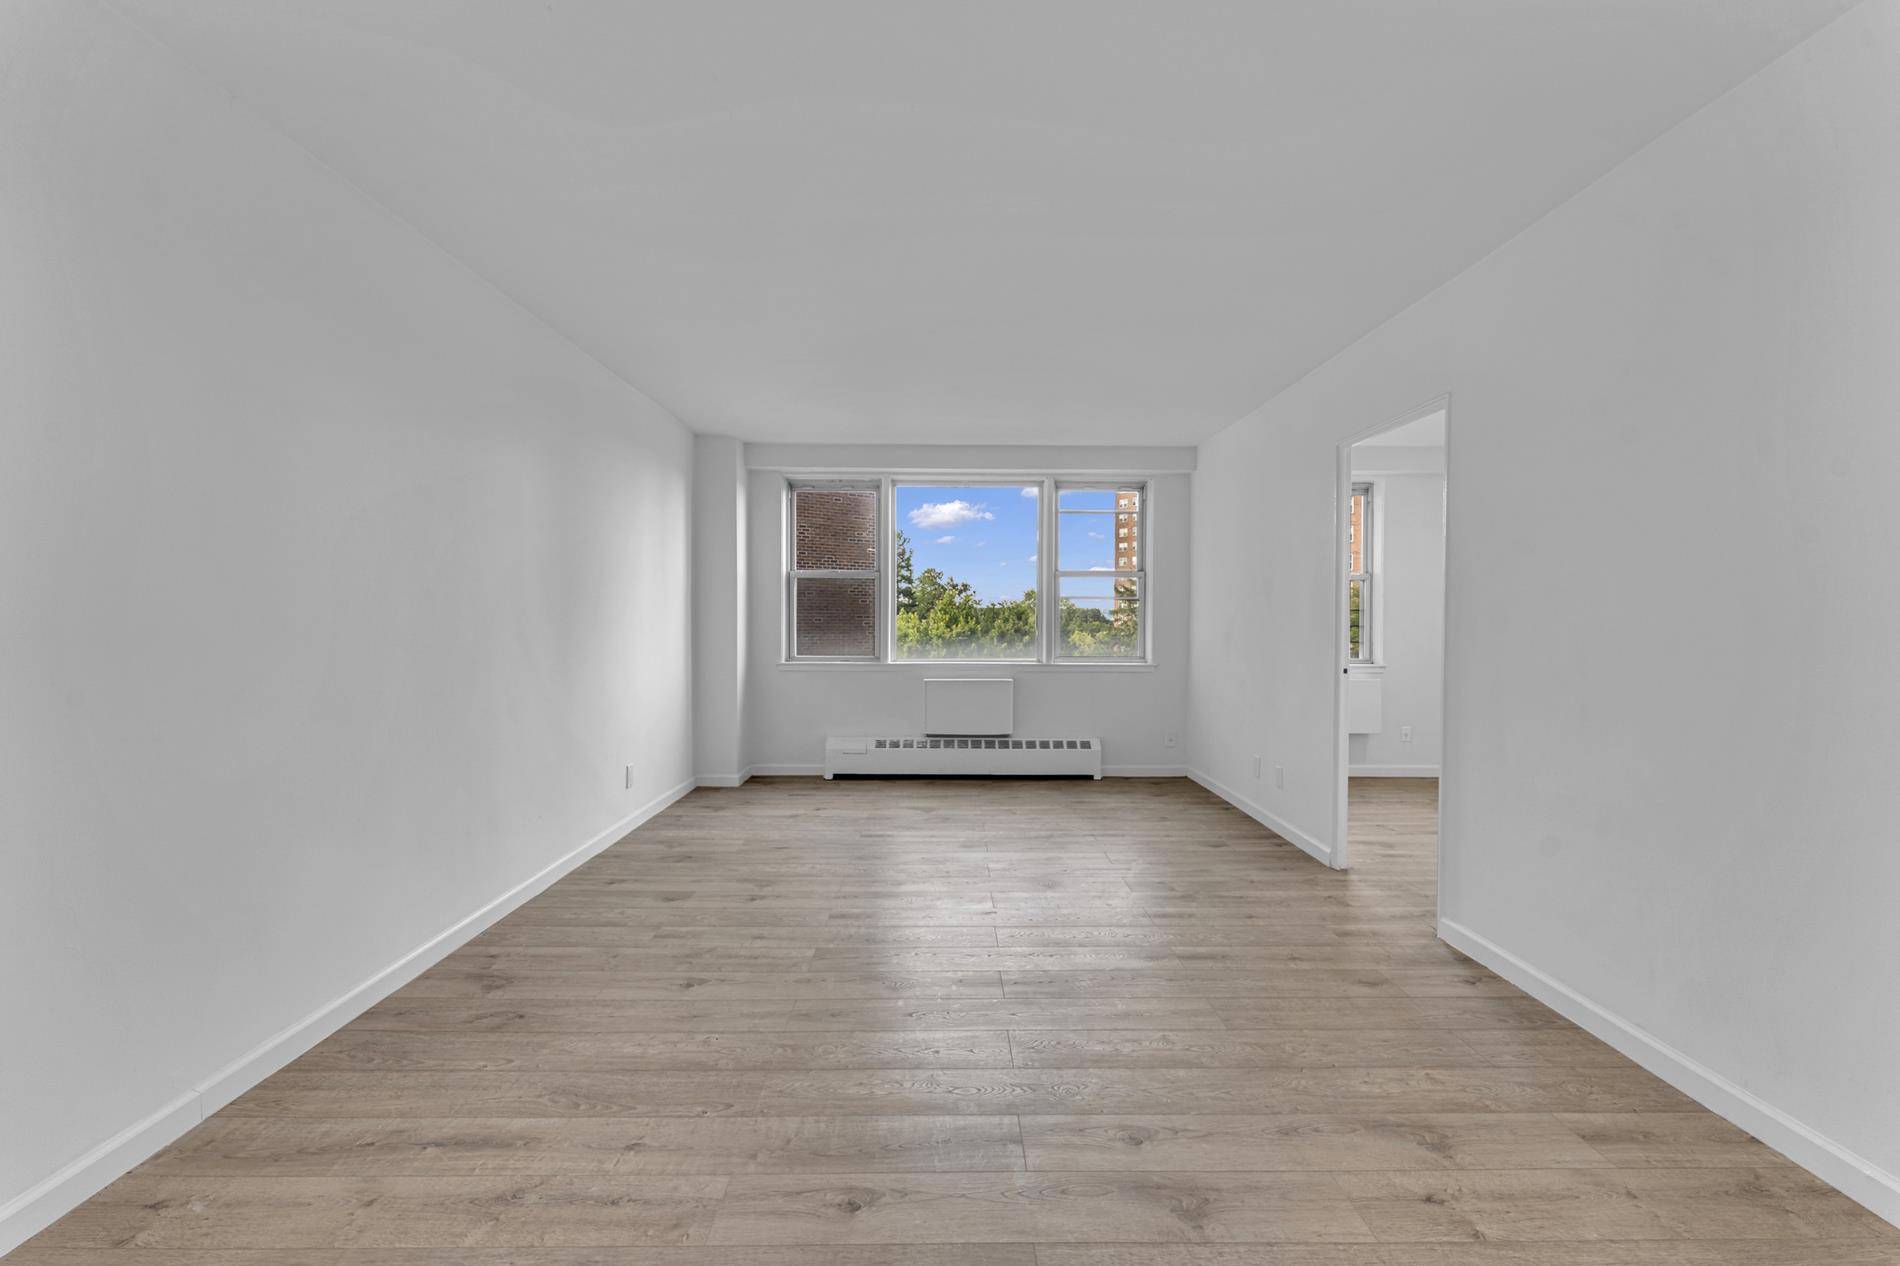 ZERO BOARD APPROVAL APPLICATION PROCESSStep into the realm of luxury with this beautifully renovated two bedroom residence, enveloped in the much coveted full service Skyview on the Hudson complex.